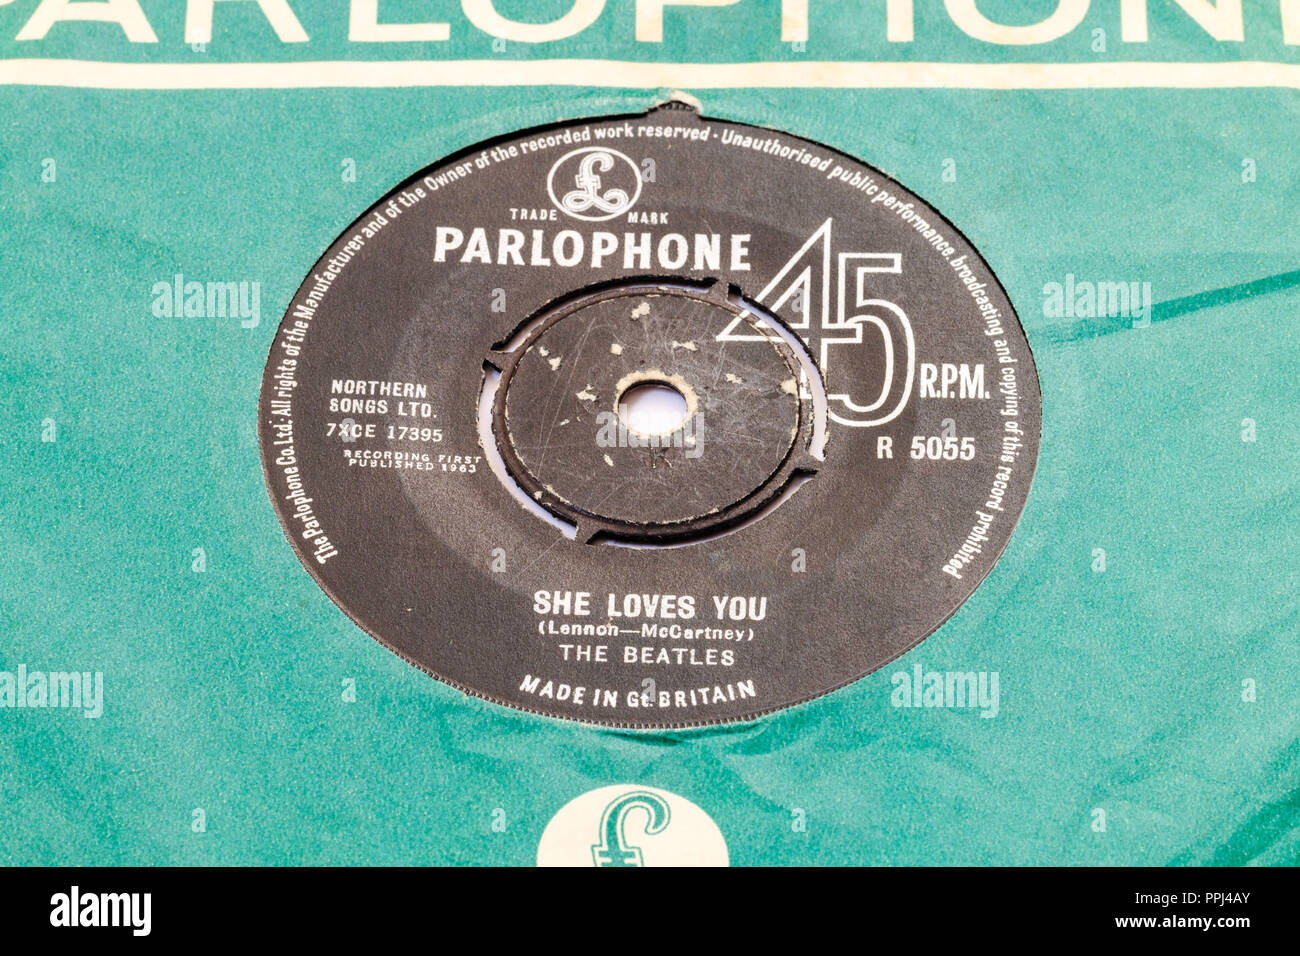 45 single track record in Parlophone green cover. The Beatles, 'She loves You' by Lennon and McCartney. 1963 R5055 Stock Photo